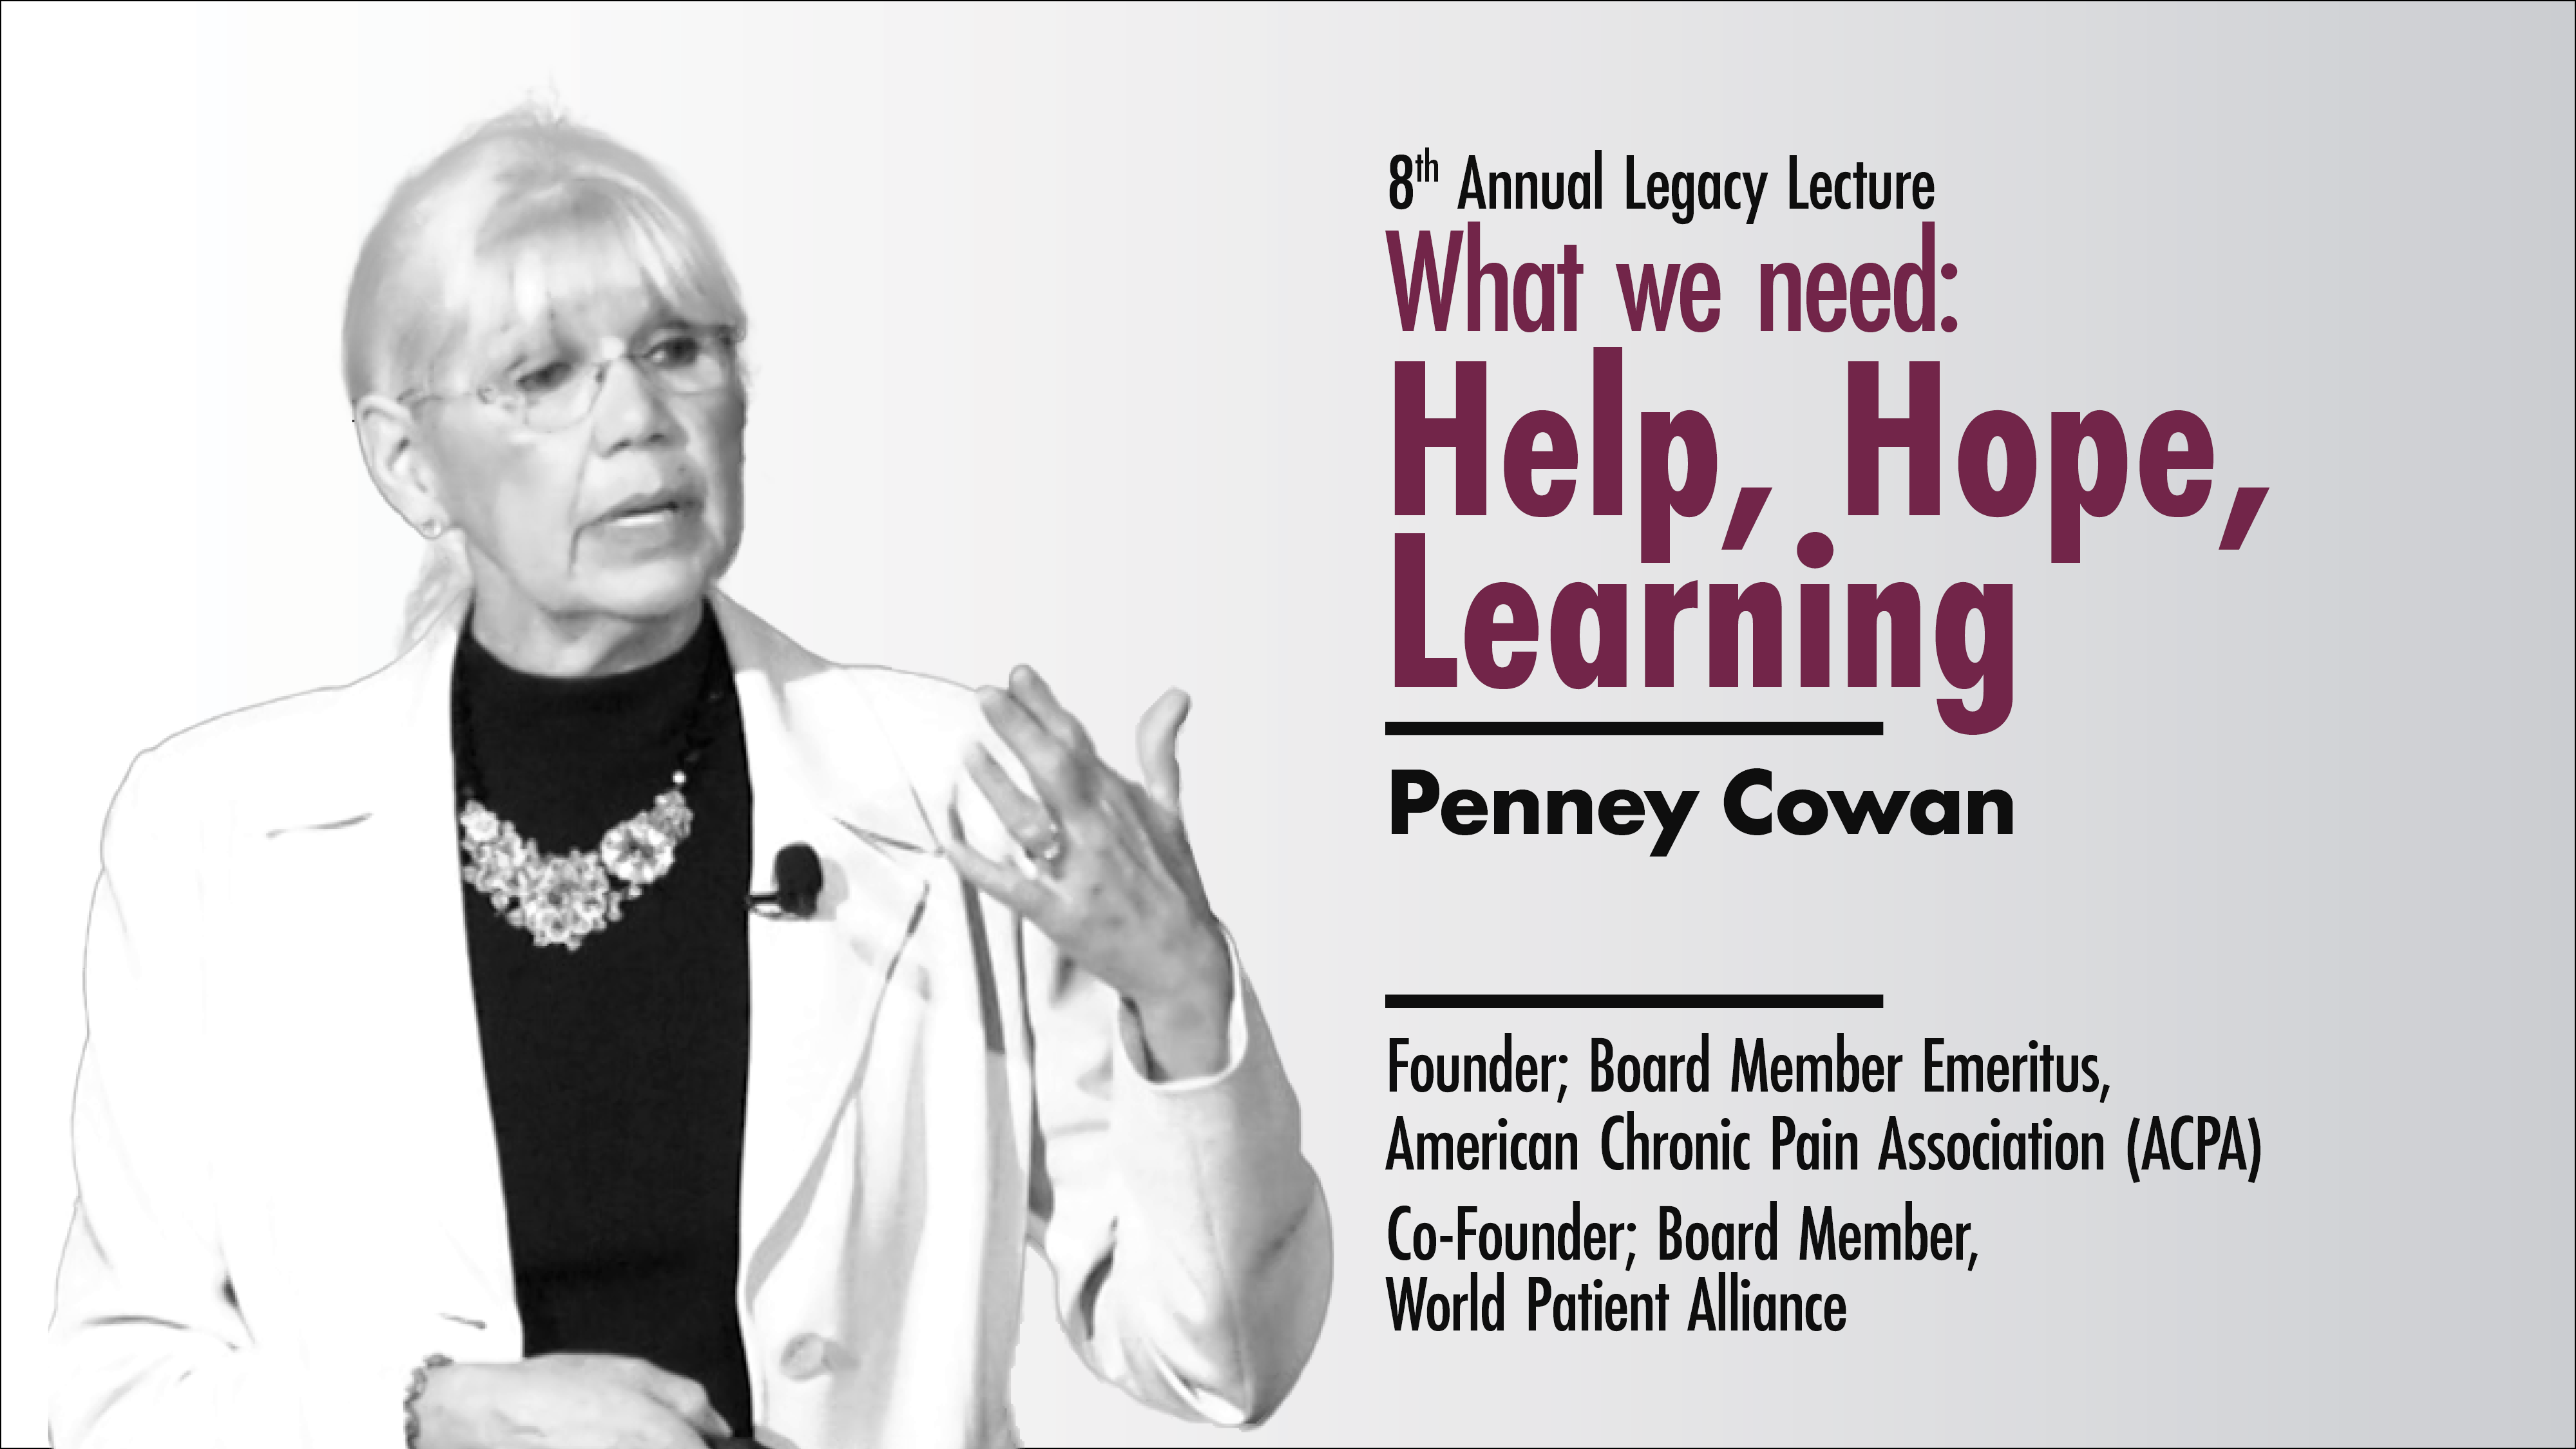 8th Annual Legacy Lecture: Help, Hope, Learning